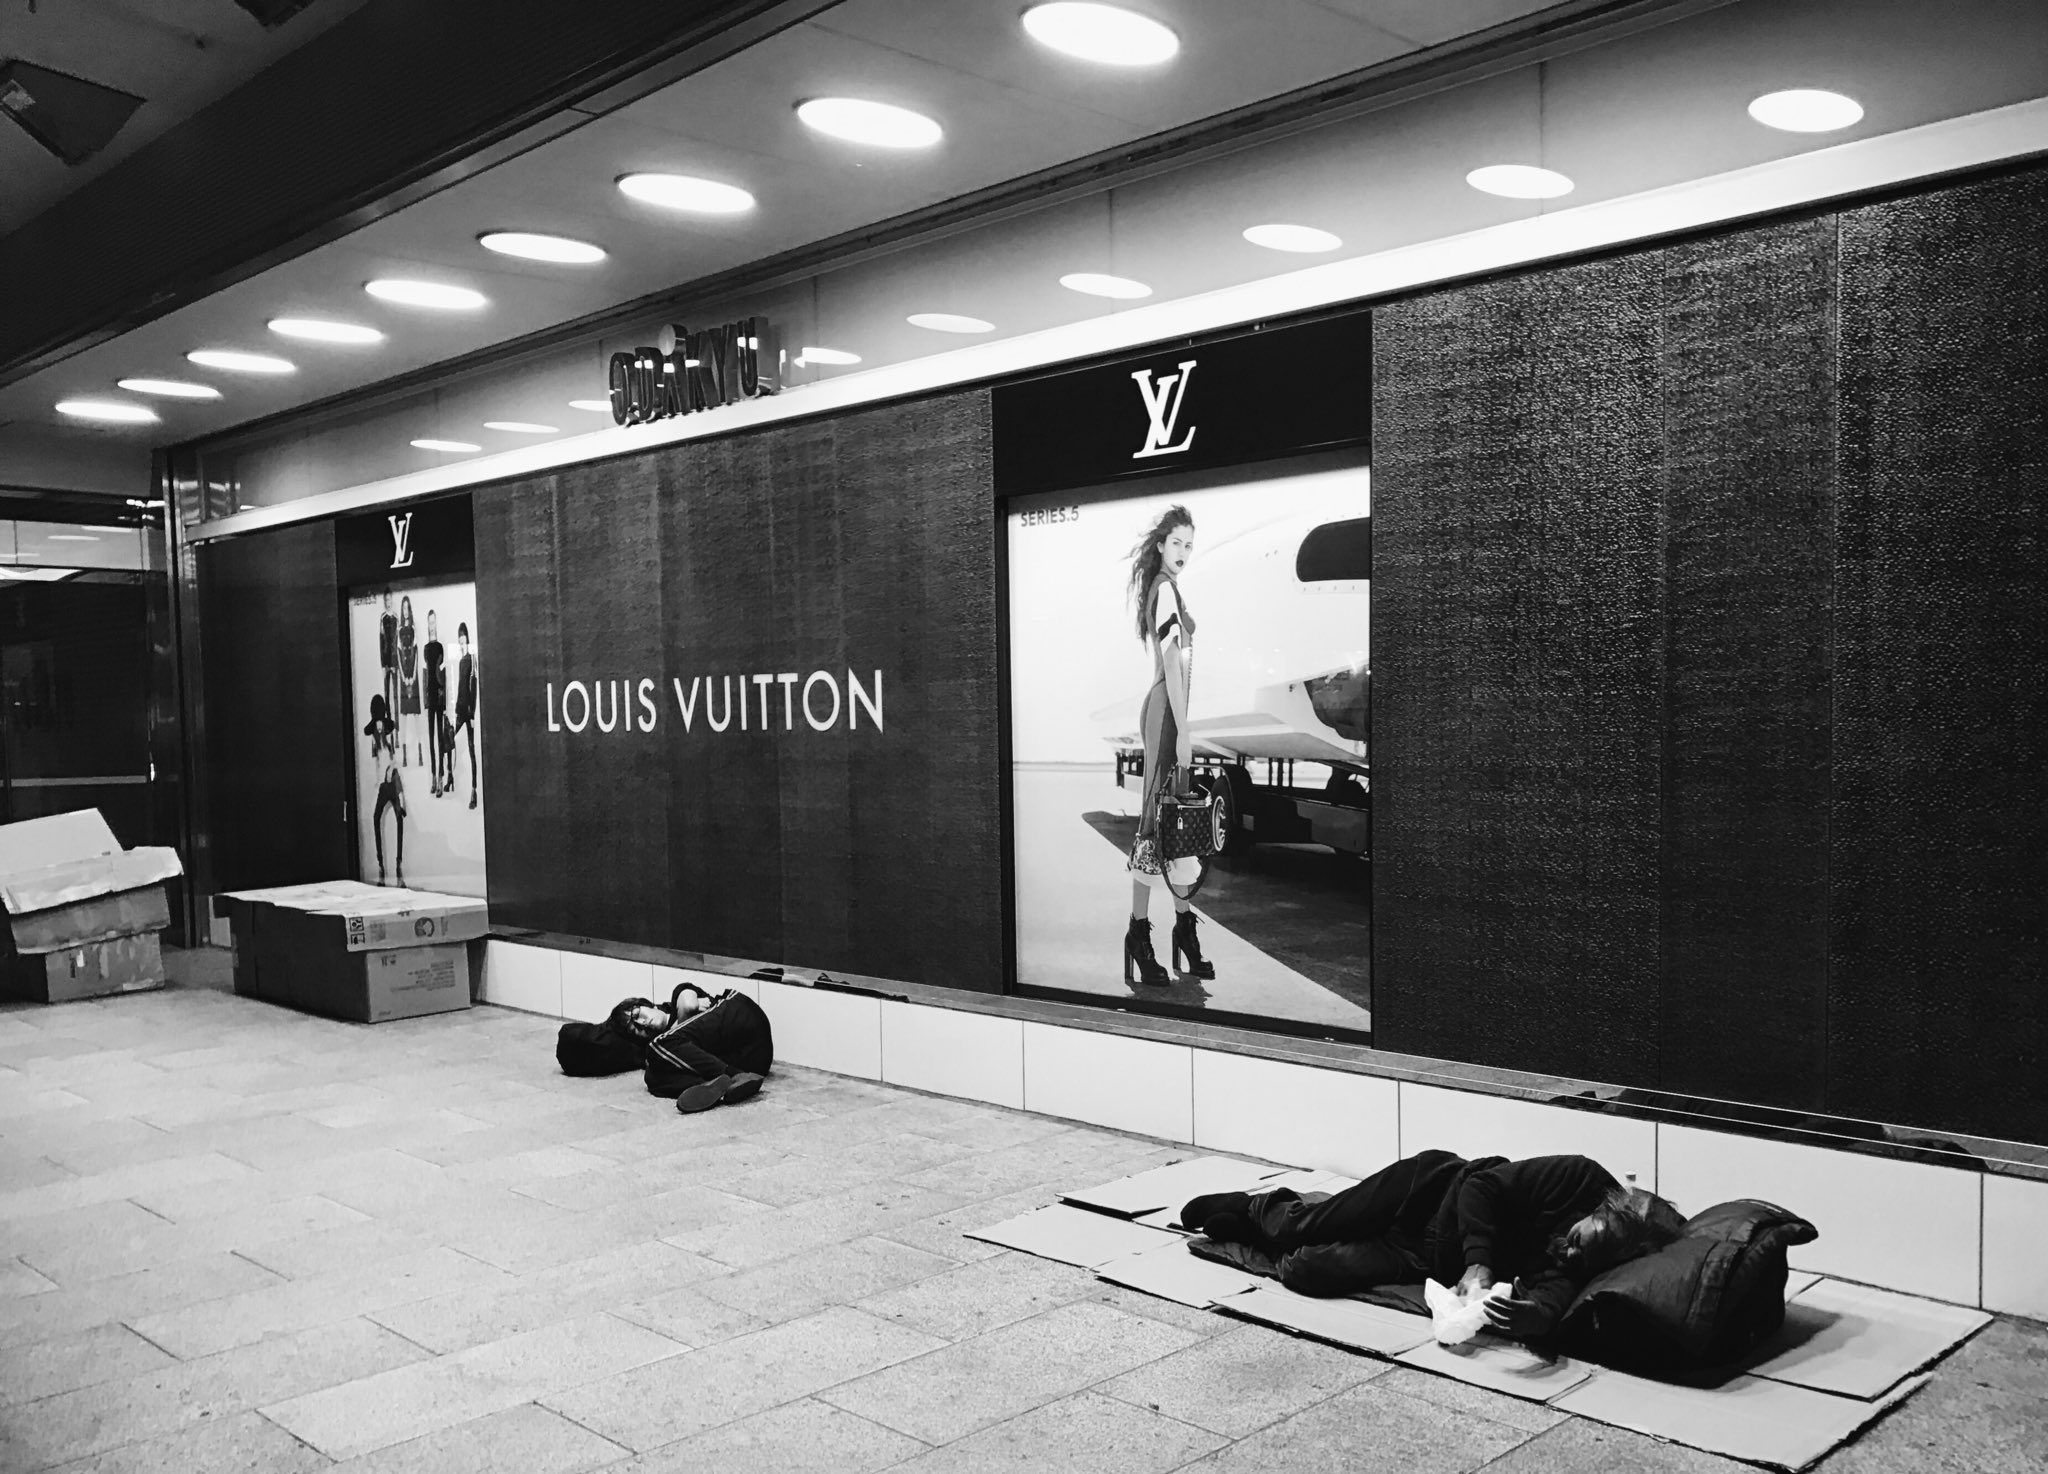 A man walks in front of the Louis Vuitton store in the Zorlu